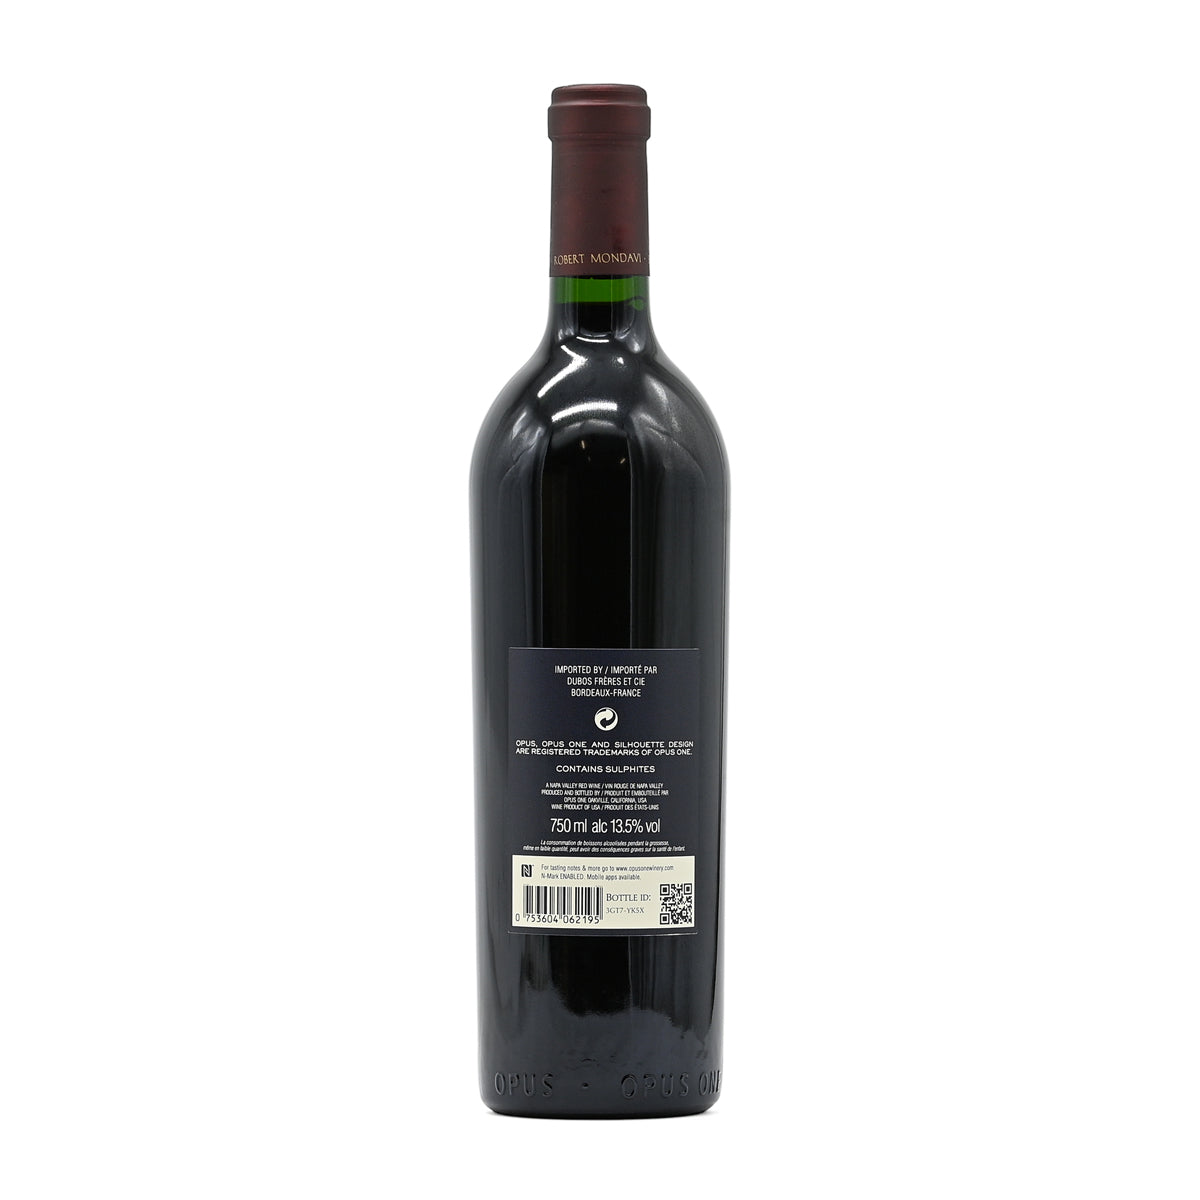 Opus One 2019, 750ml American red wine, made from a blend of Cabernet Sauvignon, Merlot, Malbec, Cabernet Franc, and Petit Verdot; from Napa Valley, California, USA – GDV Fine Wines, Hong KongOpus One 2019, 750ml American red wine; made from a blend of Cabernet Sauvignon, Merlot, Malbec, Cabernet Franc, and Petit Verdot; from Napa Valley, California, USA – GDV Fine Wines, Hong Kong